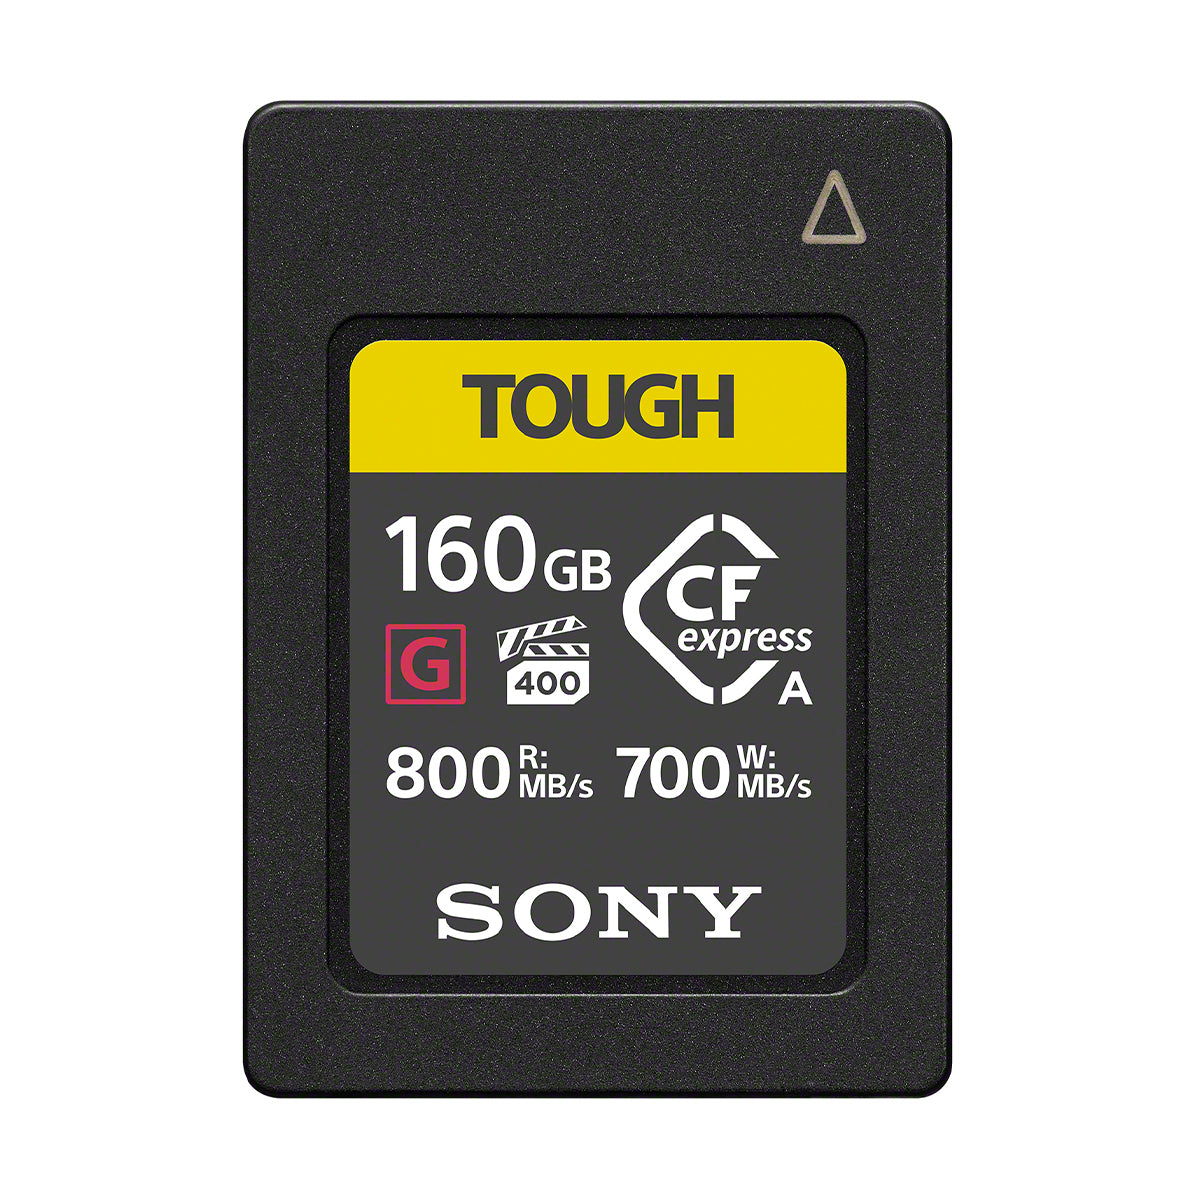 Sony 160GB CFexpress Type A Memory Card (VPG 400)